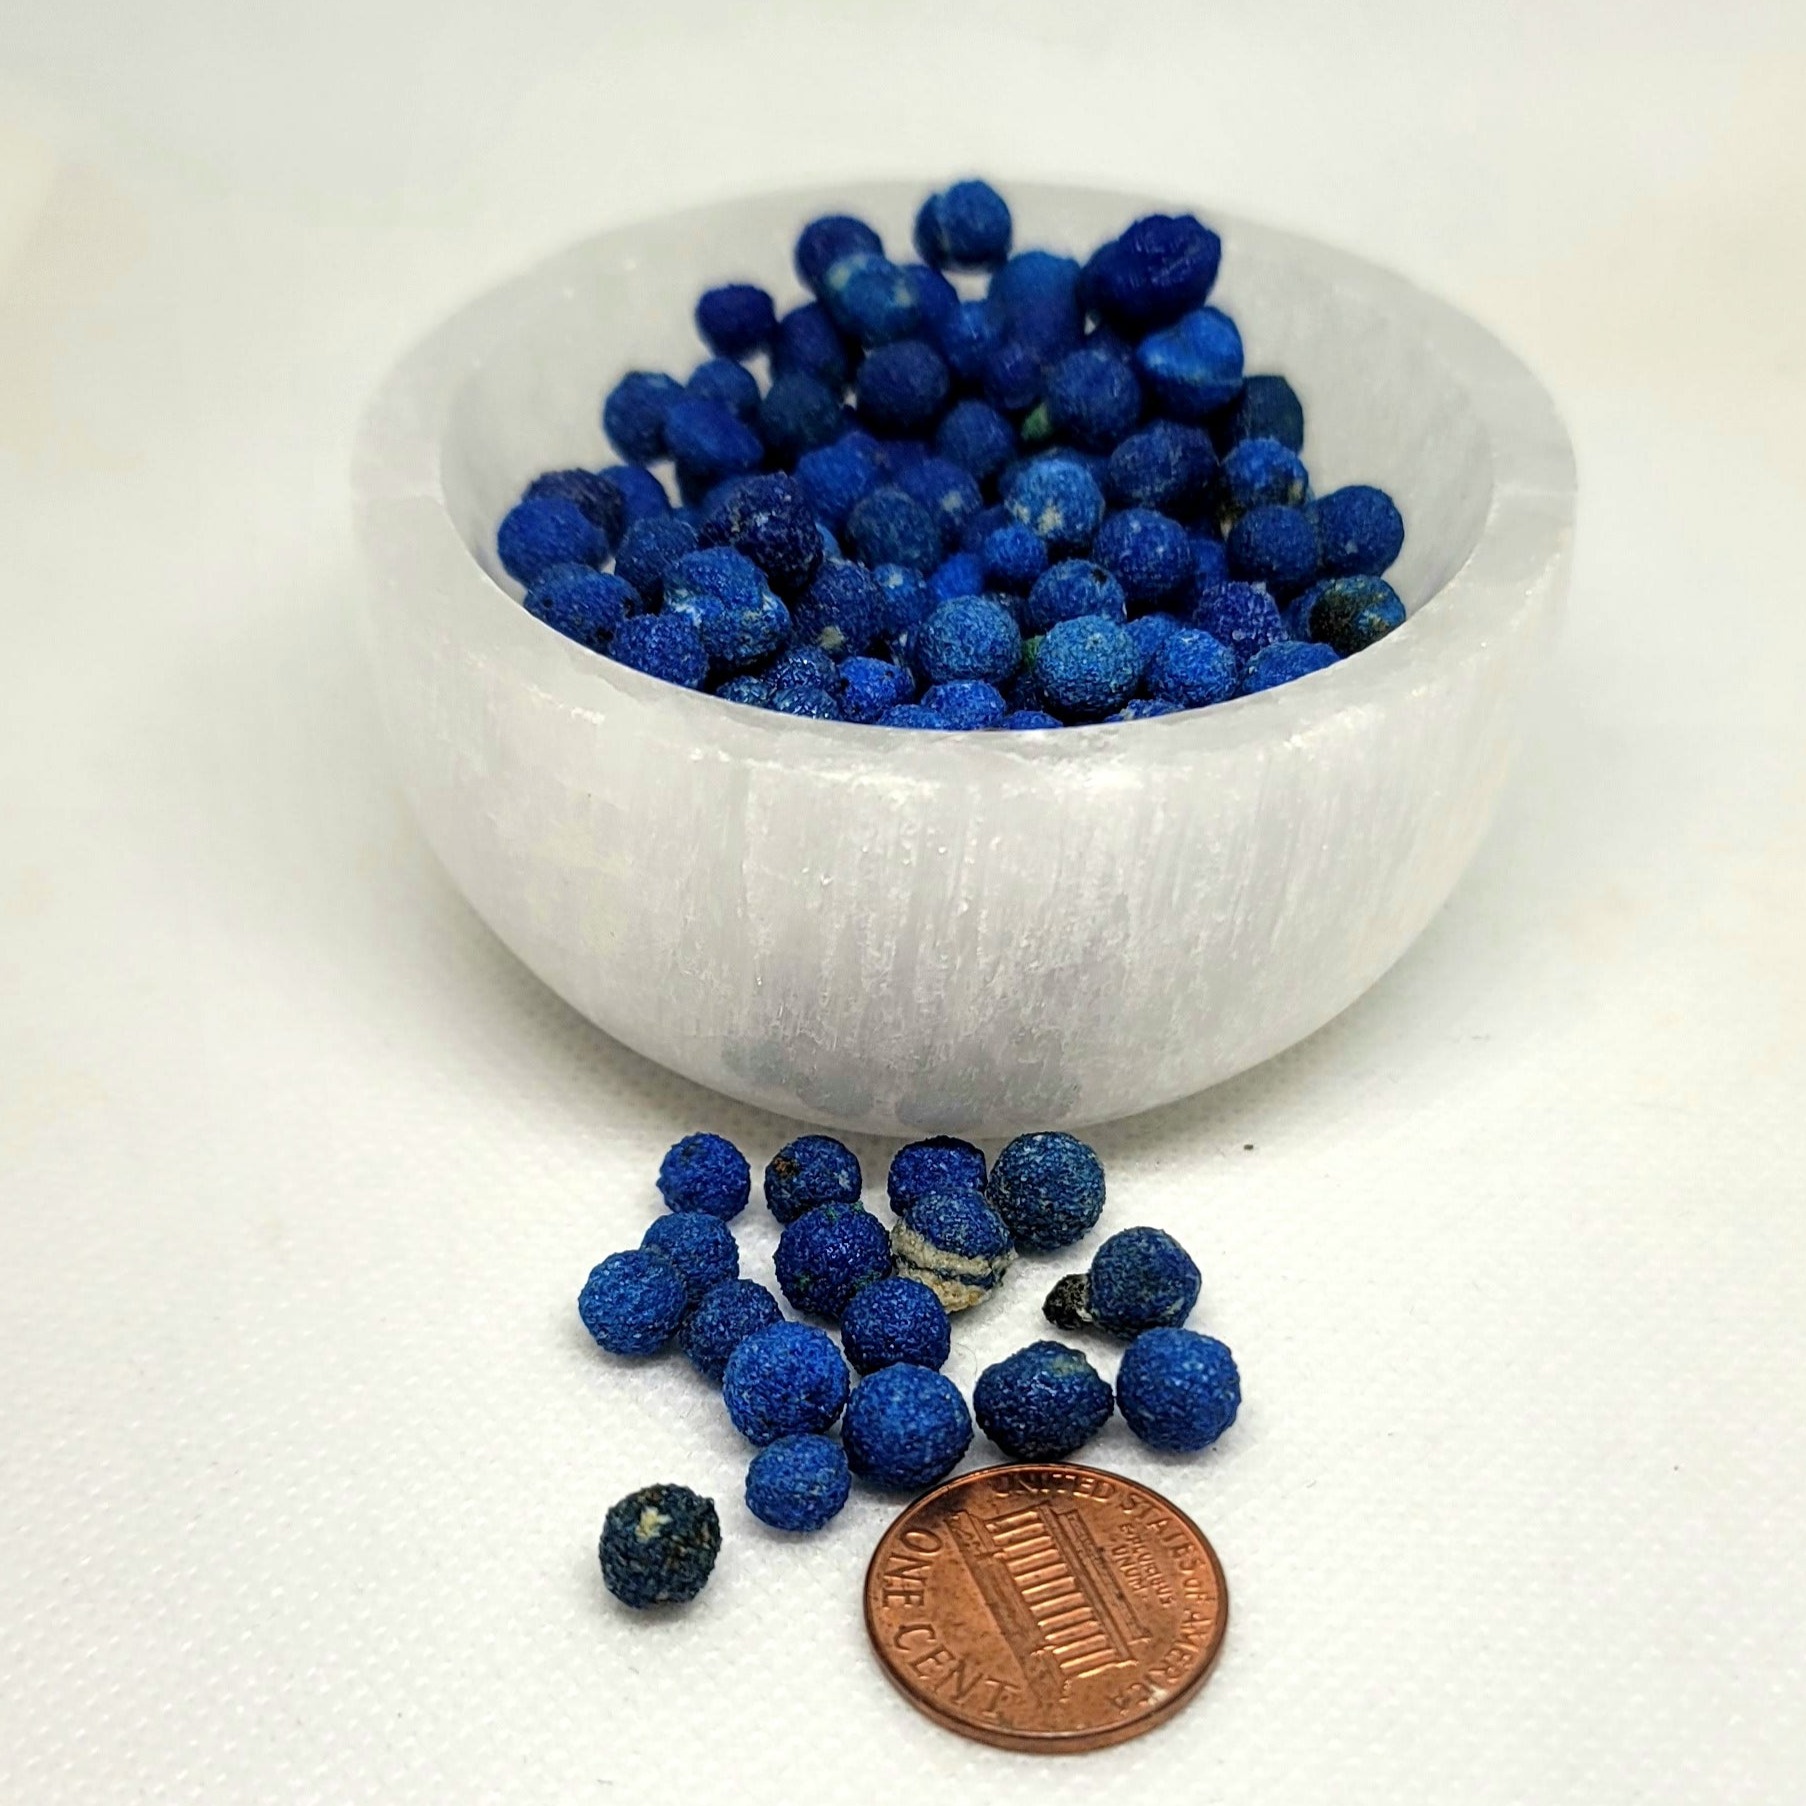 Azurite Berries - Psychic Abilites, Calming and Patience, Manifestation